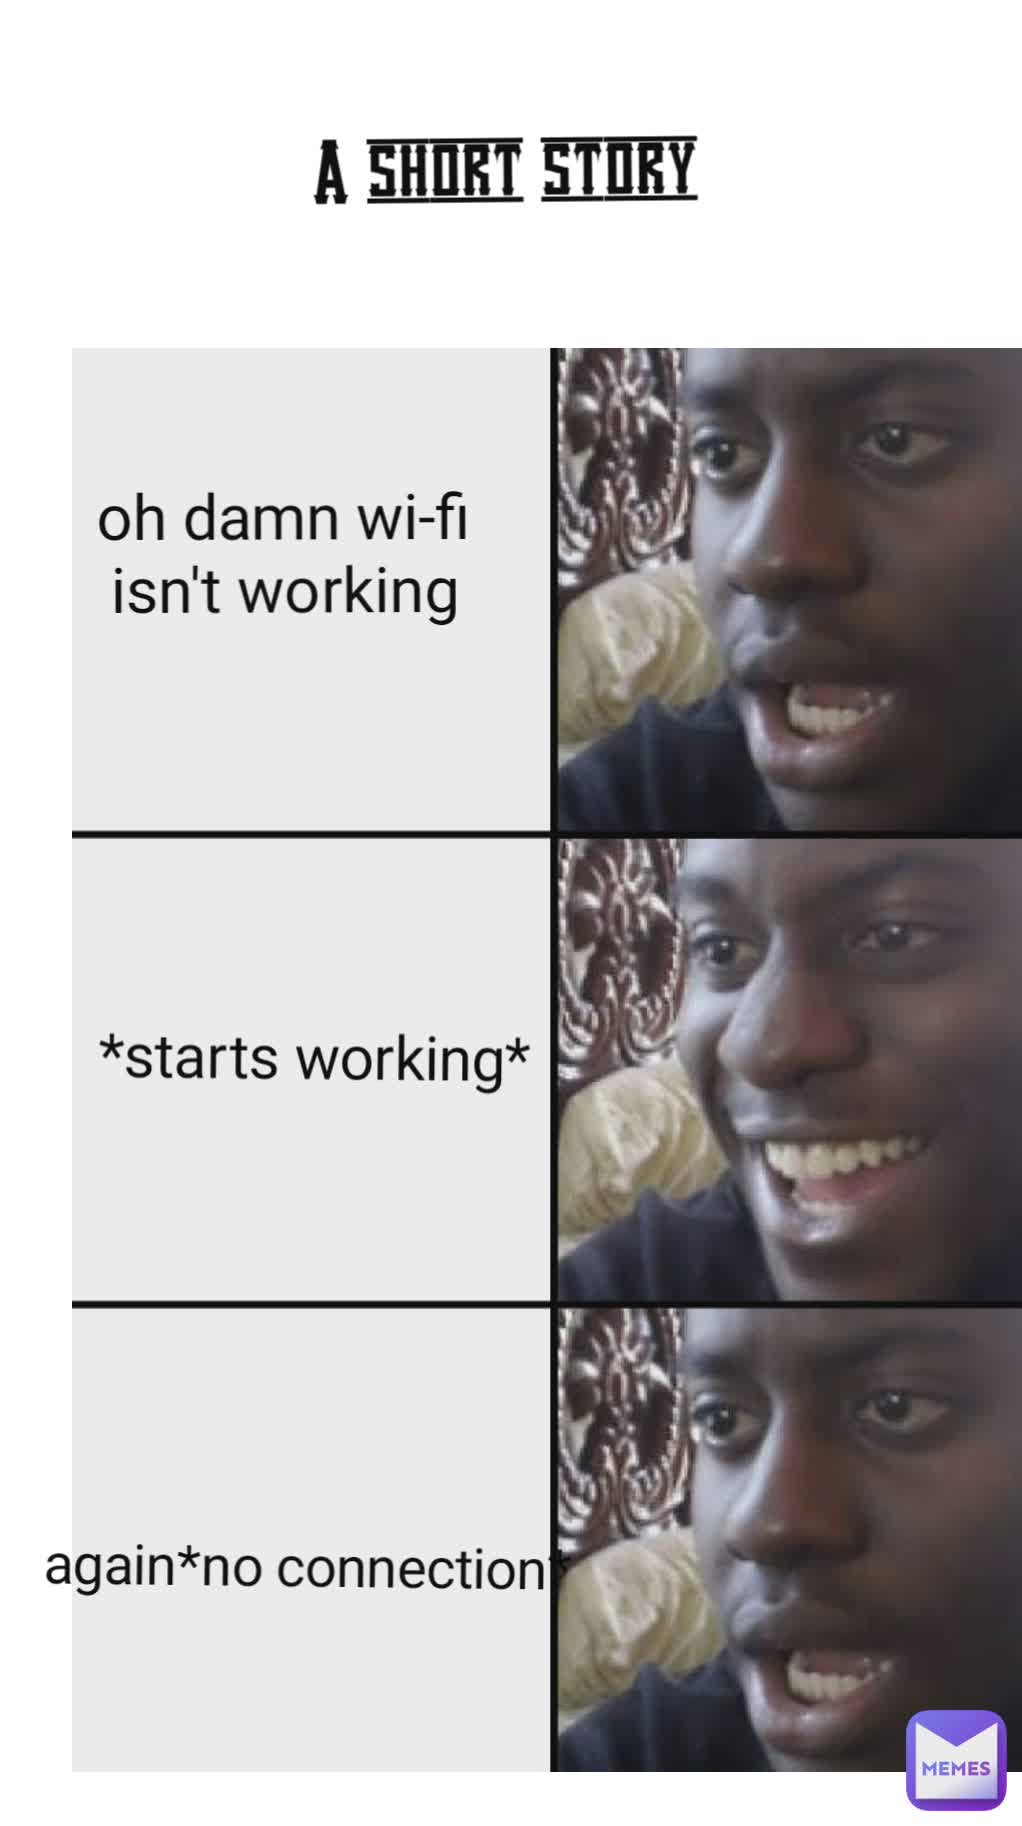 A short story *starts working* oh damn wi-fi isn't working again*no connection*